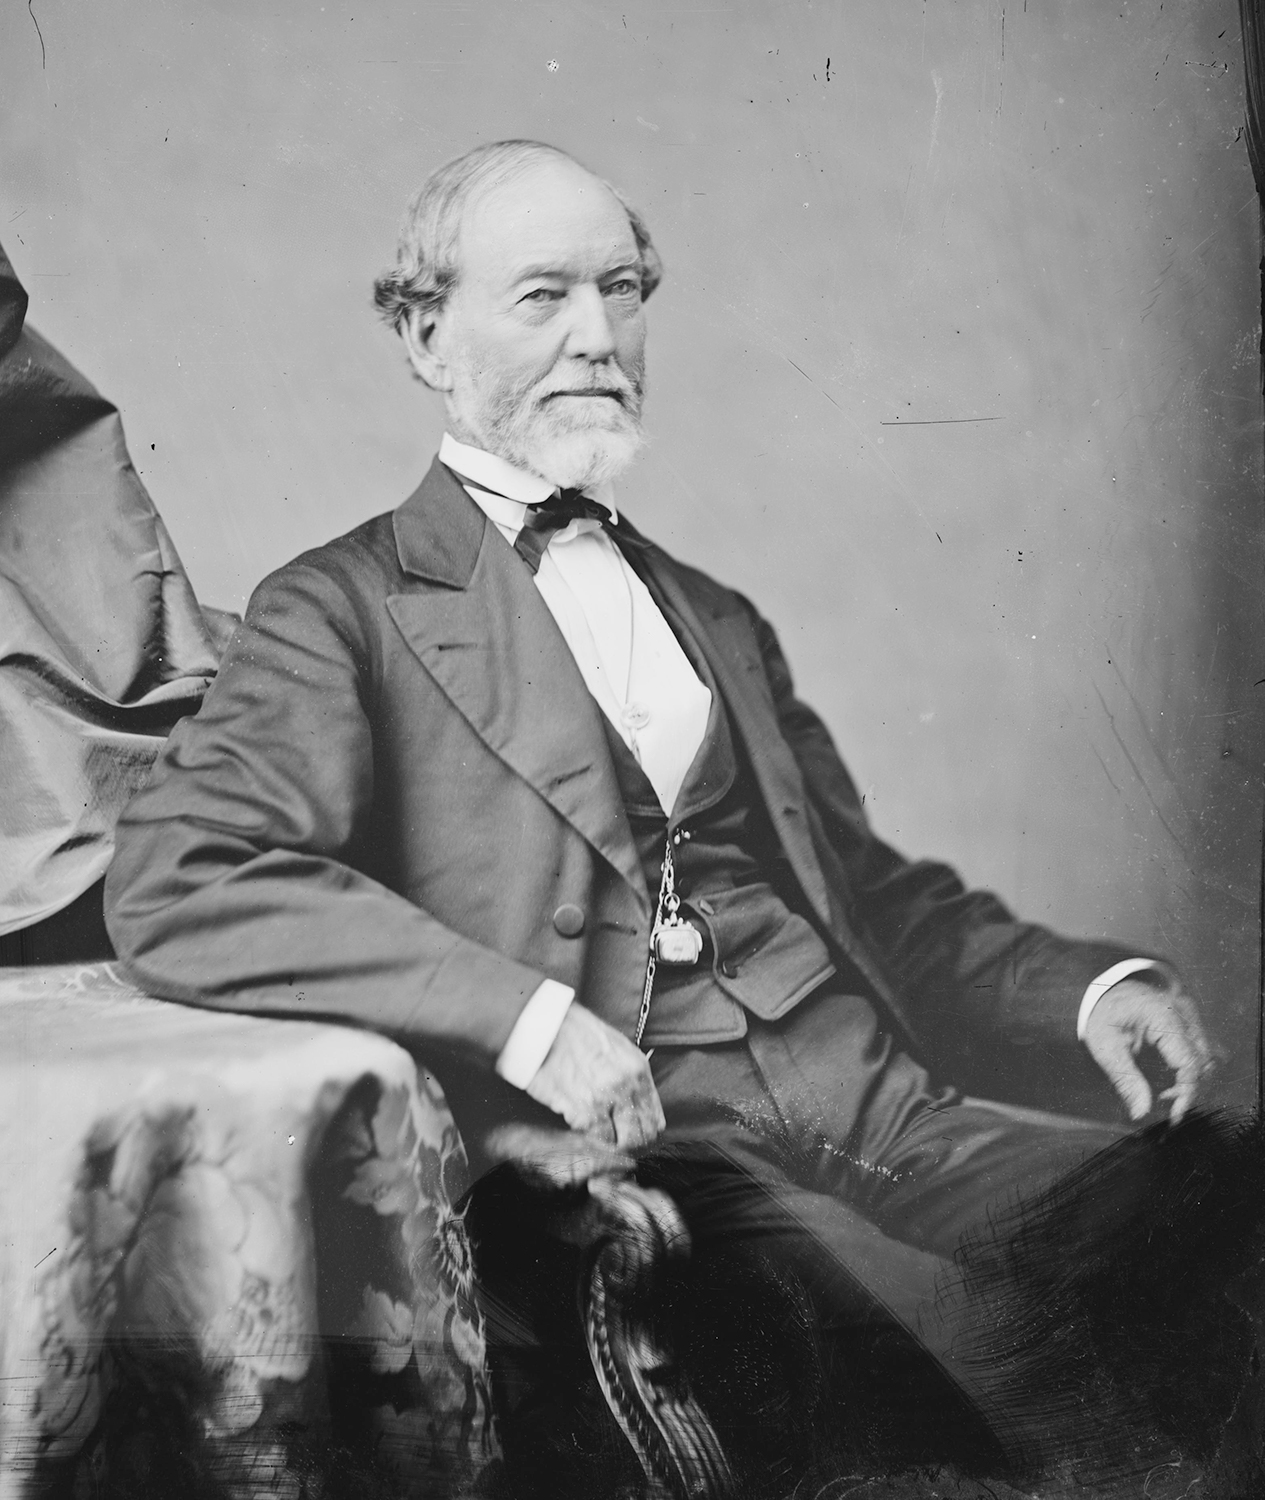 A black of white portrait of an older man wearing a suit, seated with his arm on a table on the left of the photograph.